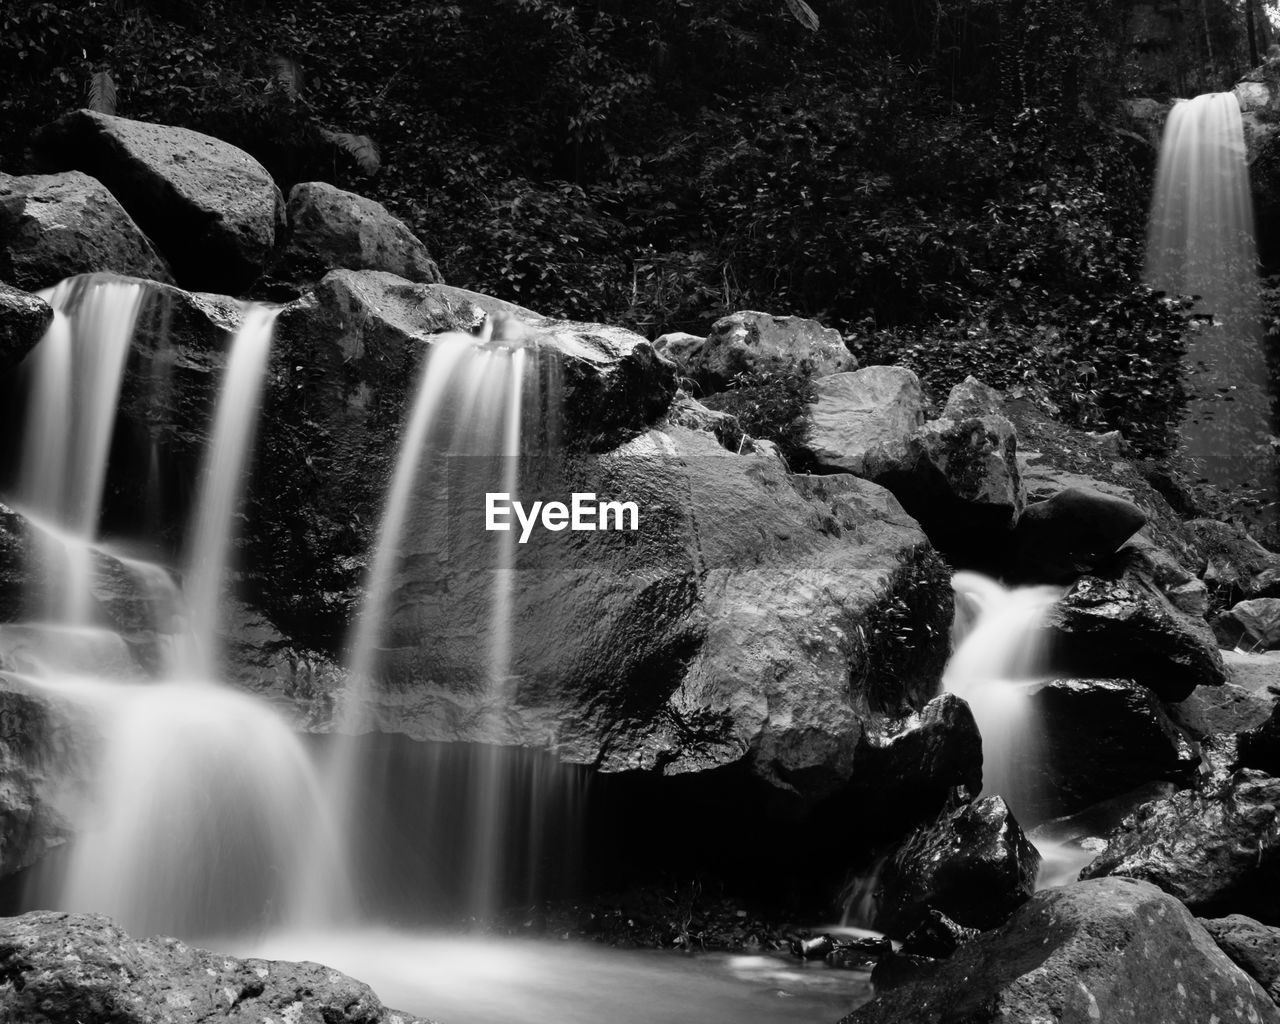 waterfall, water, scenics - nature, motion, water feature, beauty in nature, long exposure, rock, nature, black and white, monochrome photography, flowing water, environment, flowing, monochrome, blurred motion, land, forest, tree, body of water, stream, no people, splashing, plant, outdoors, river, non-urban scene, landscape, rock formation, travel destinations